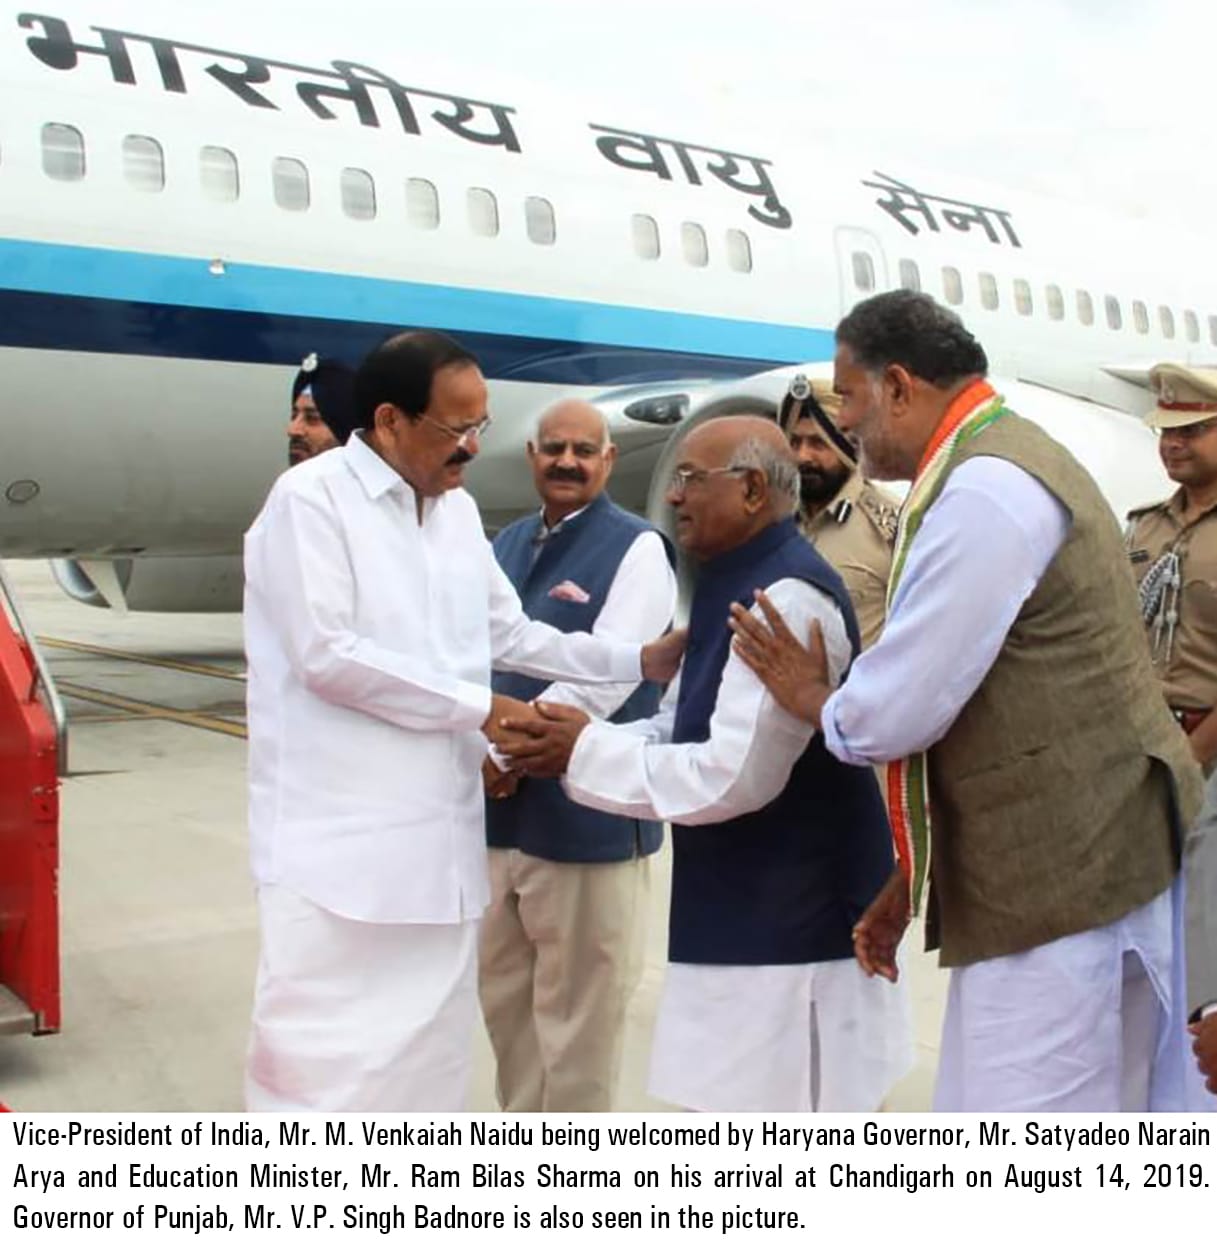 Vice President of India being welcomed by Governor